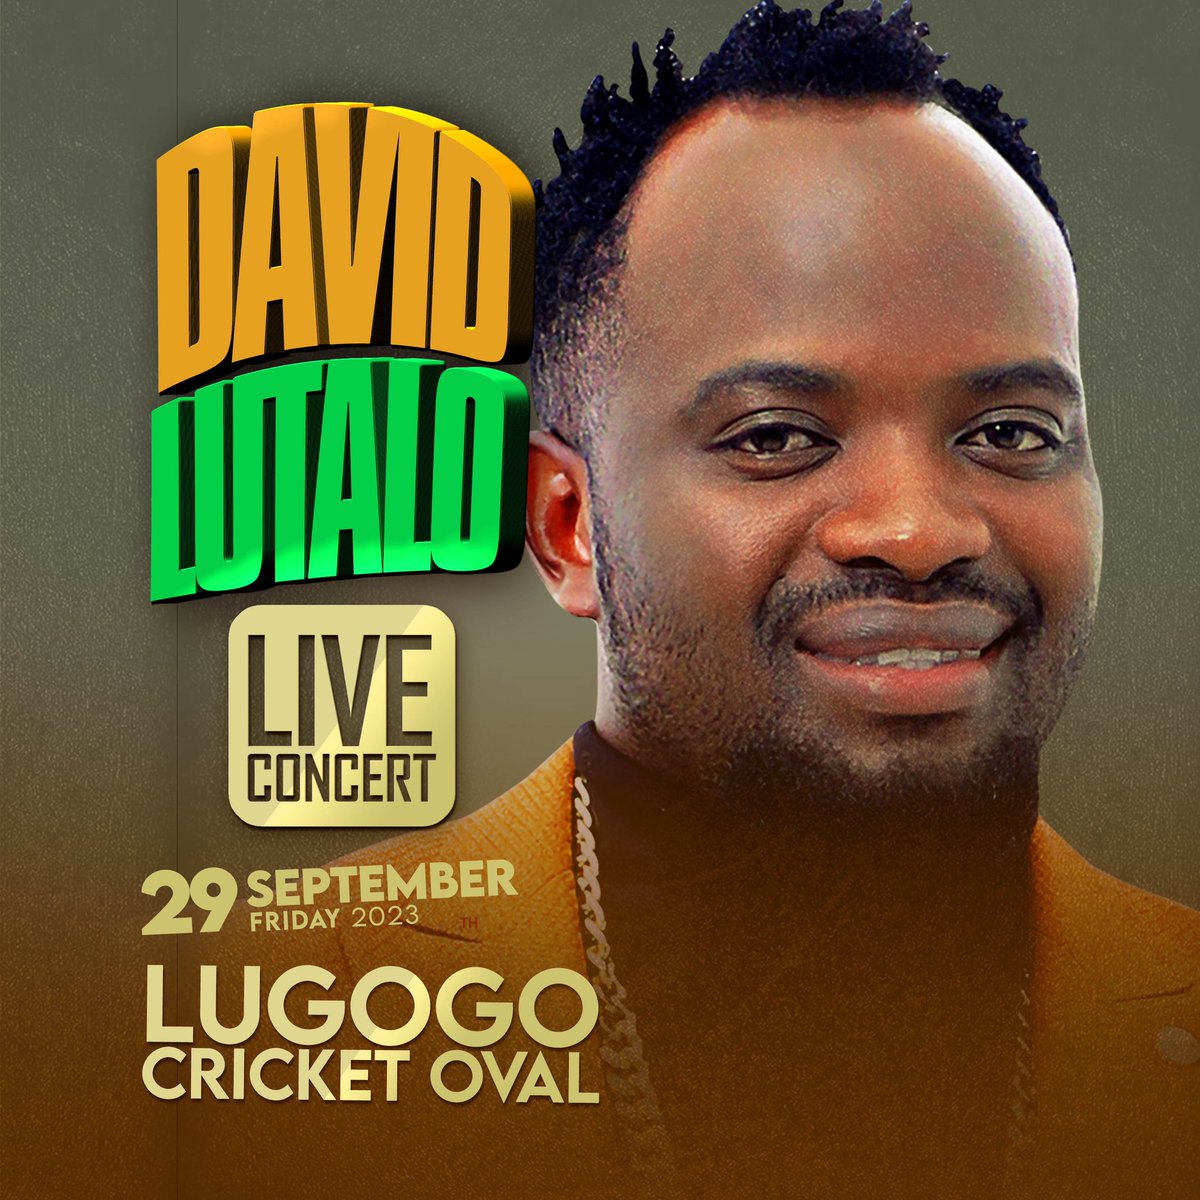 29th Sept | LIVE IN CONCERT
LUGOGO CRICKET OVAL | Mark the date!